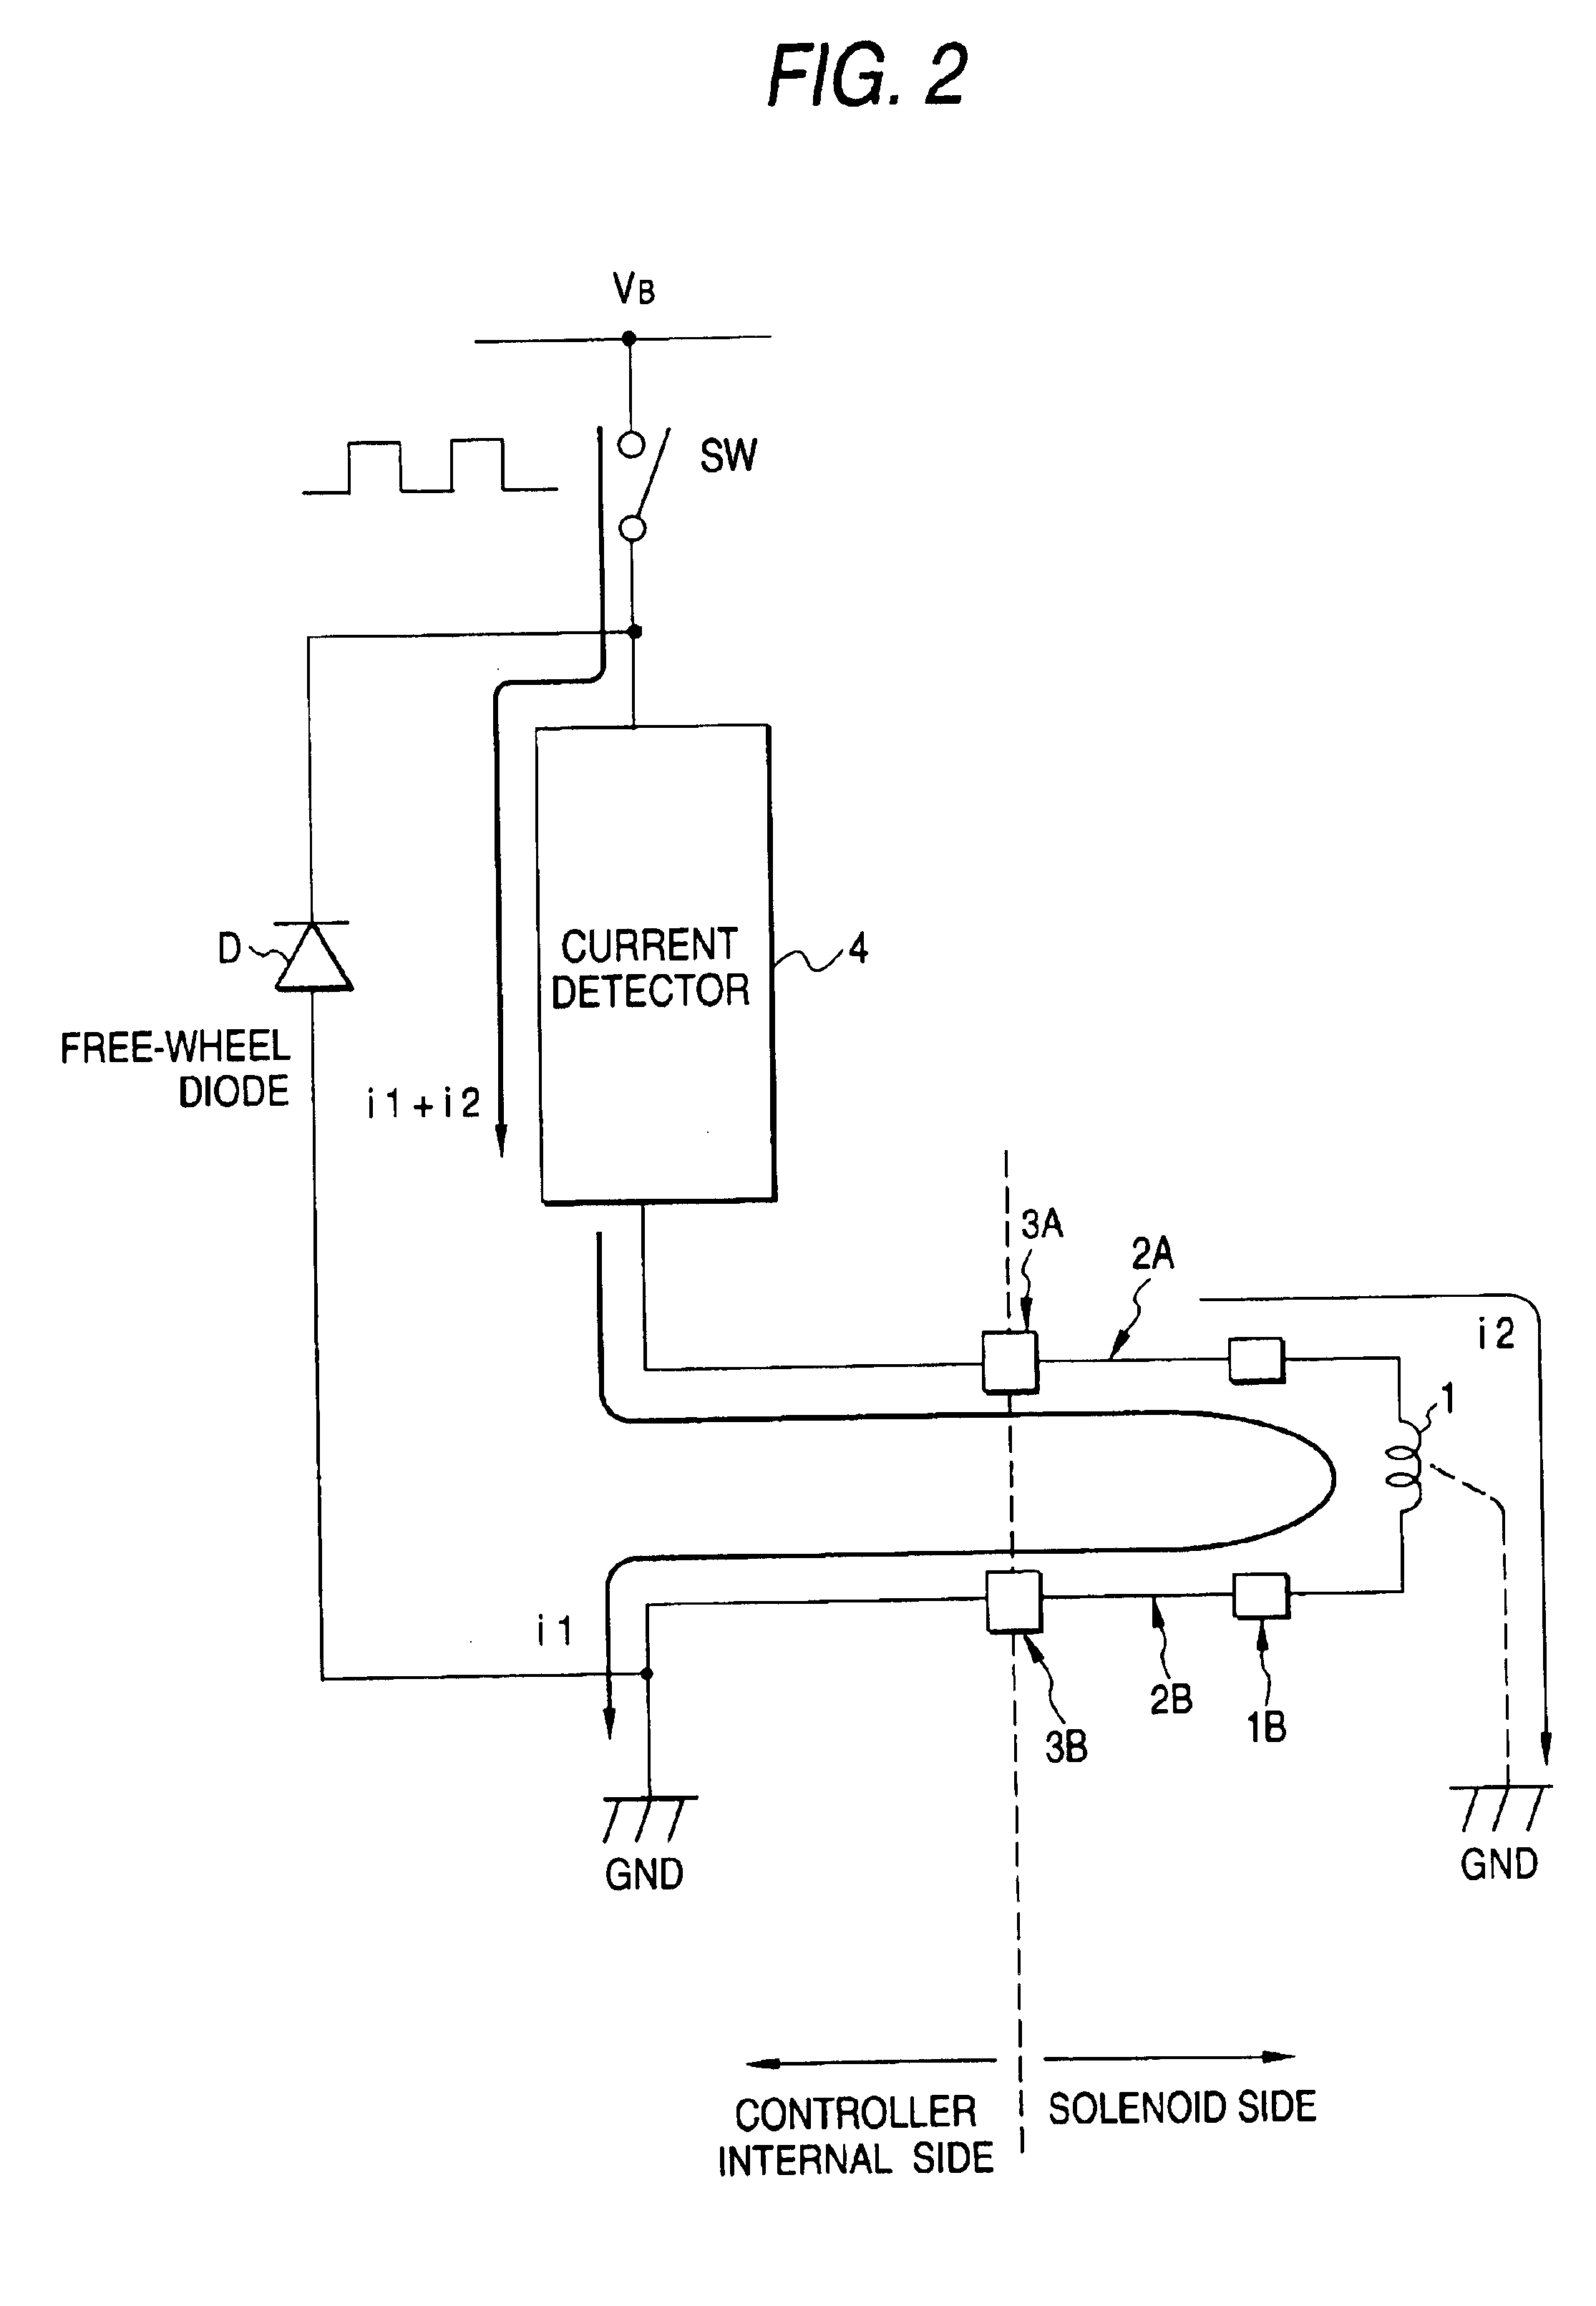 Solenoid driving device